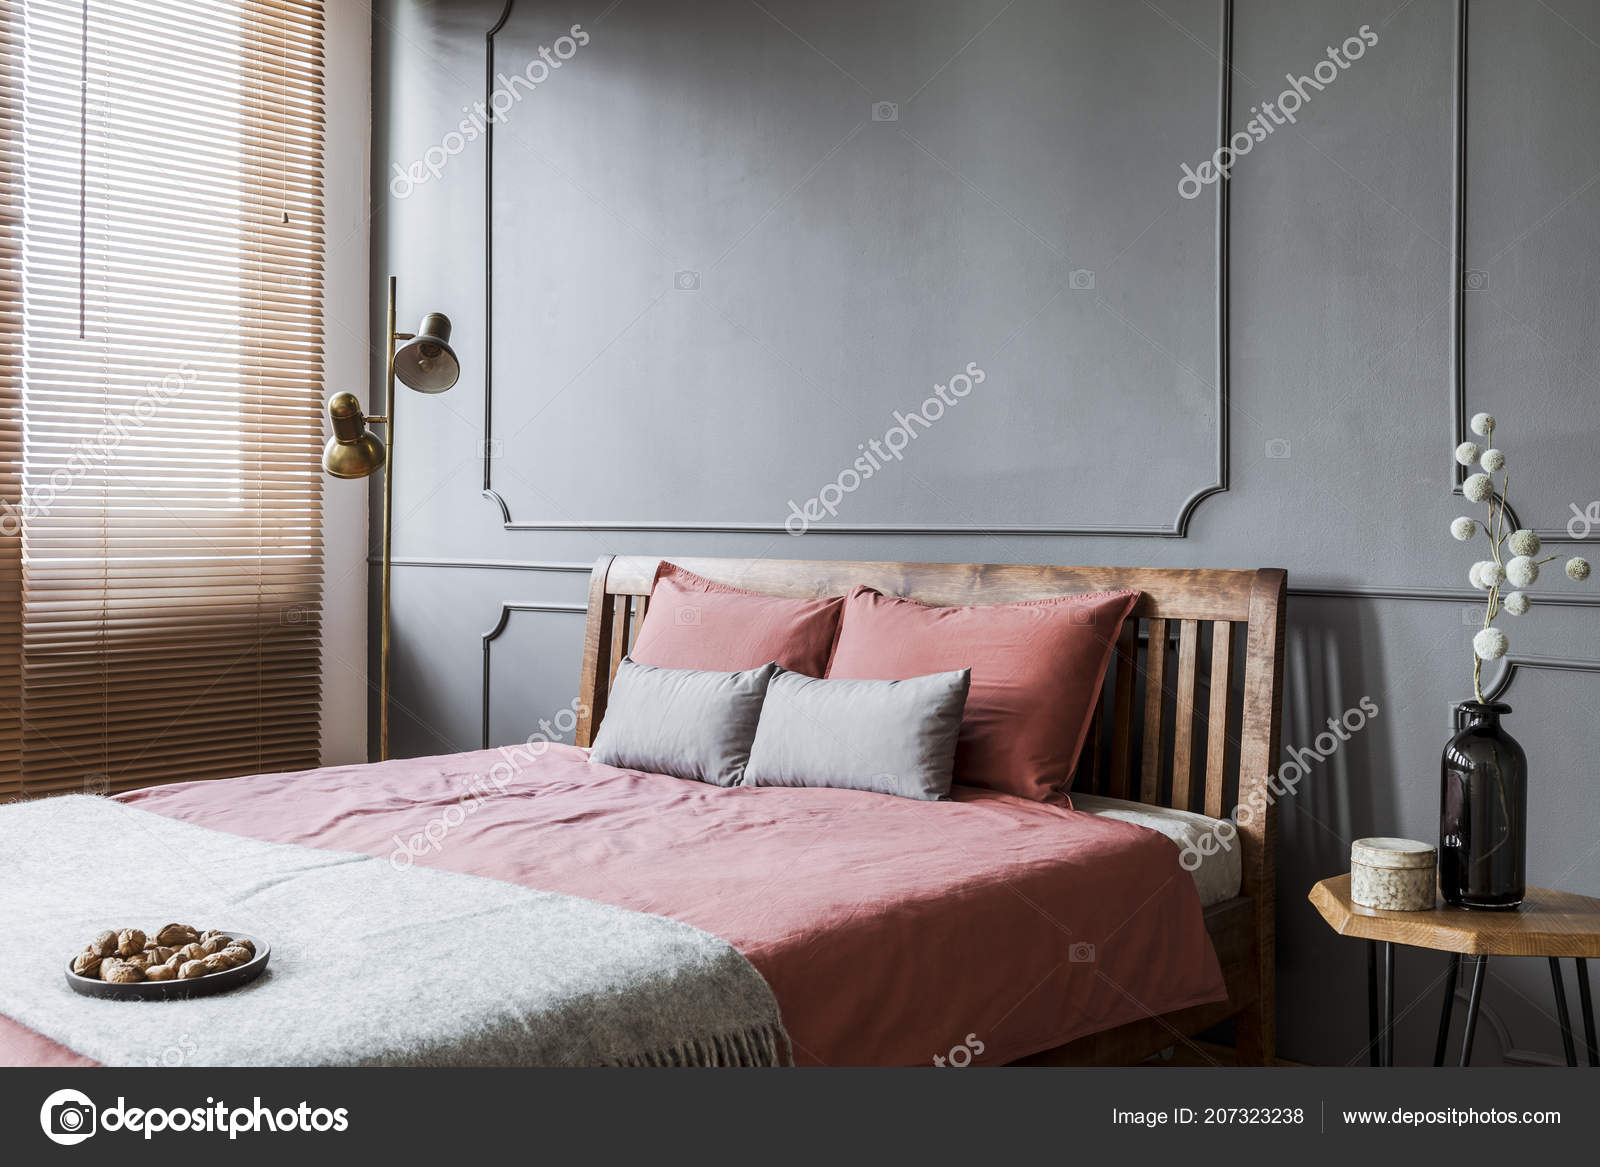 Pink Grey And Gold Bedroom Pink Bed Grey Wall Molding Woman Bedroom Interior Gold Lamp Stock Photo C Photographee Eu 207323238